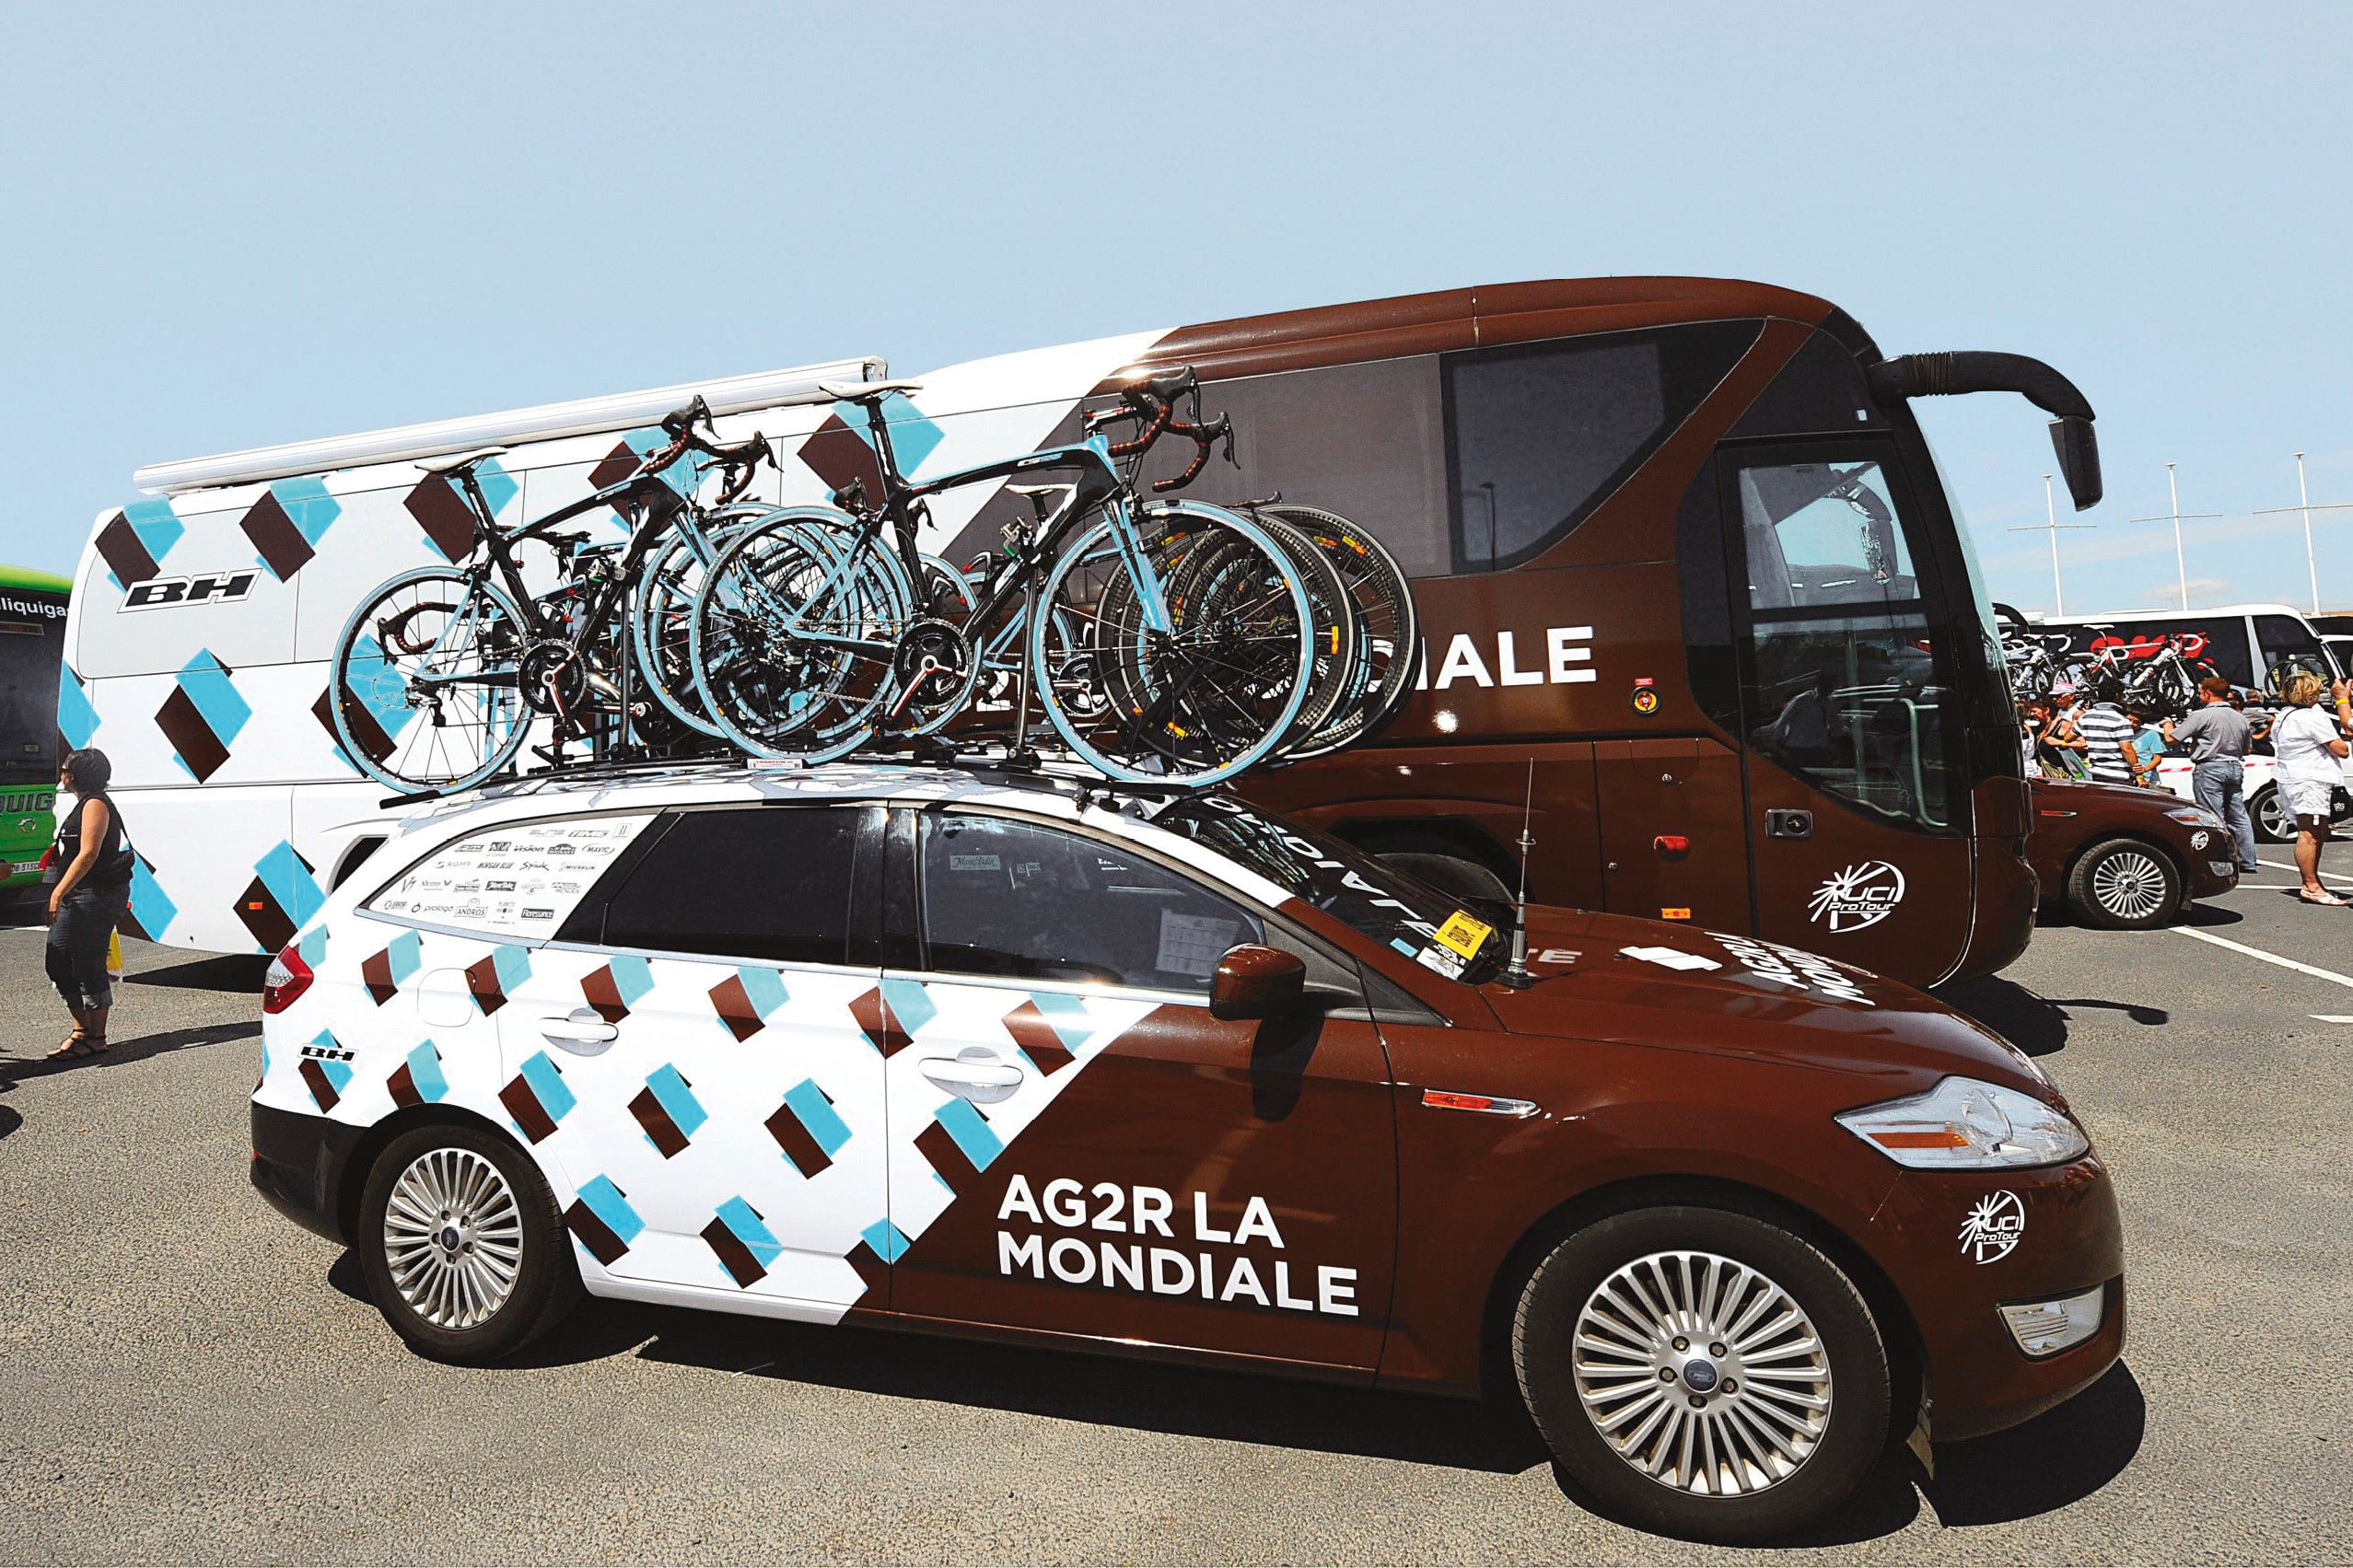 studio dumbar design visual brand identity AG2R LA MONDIALE French insurance company tour de france racing team bicycle and uniform design vehicle and bus design